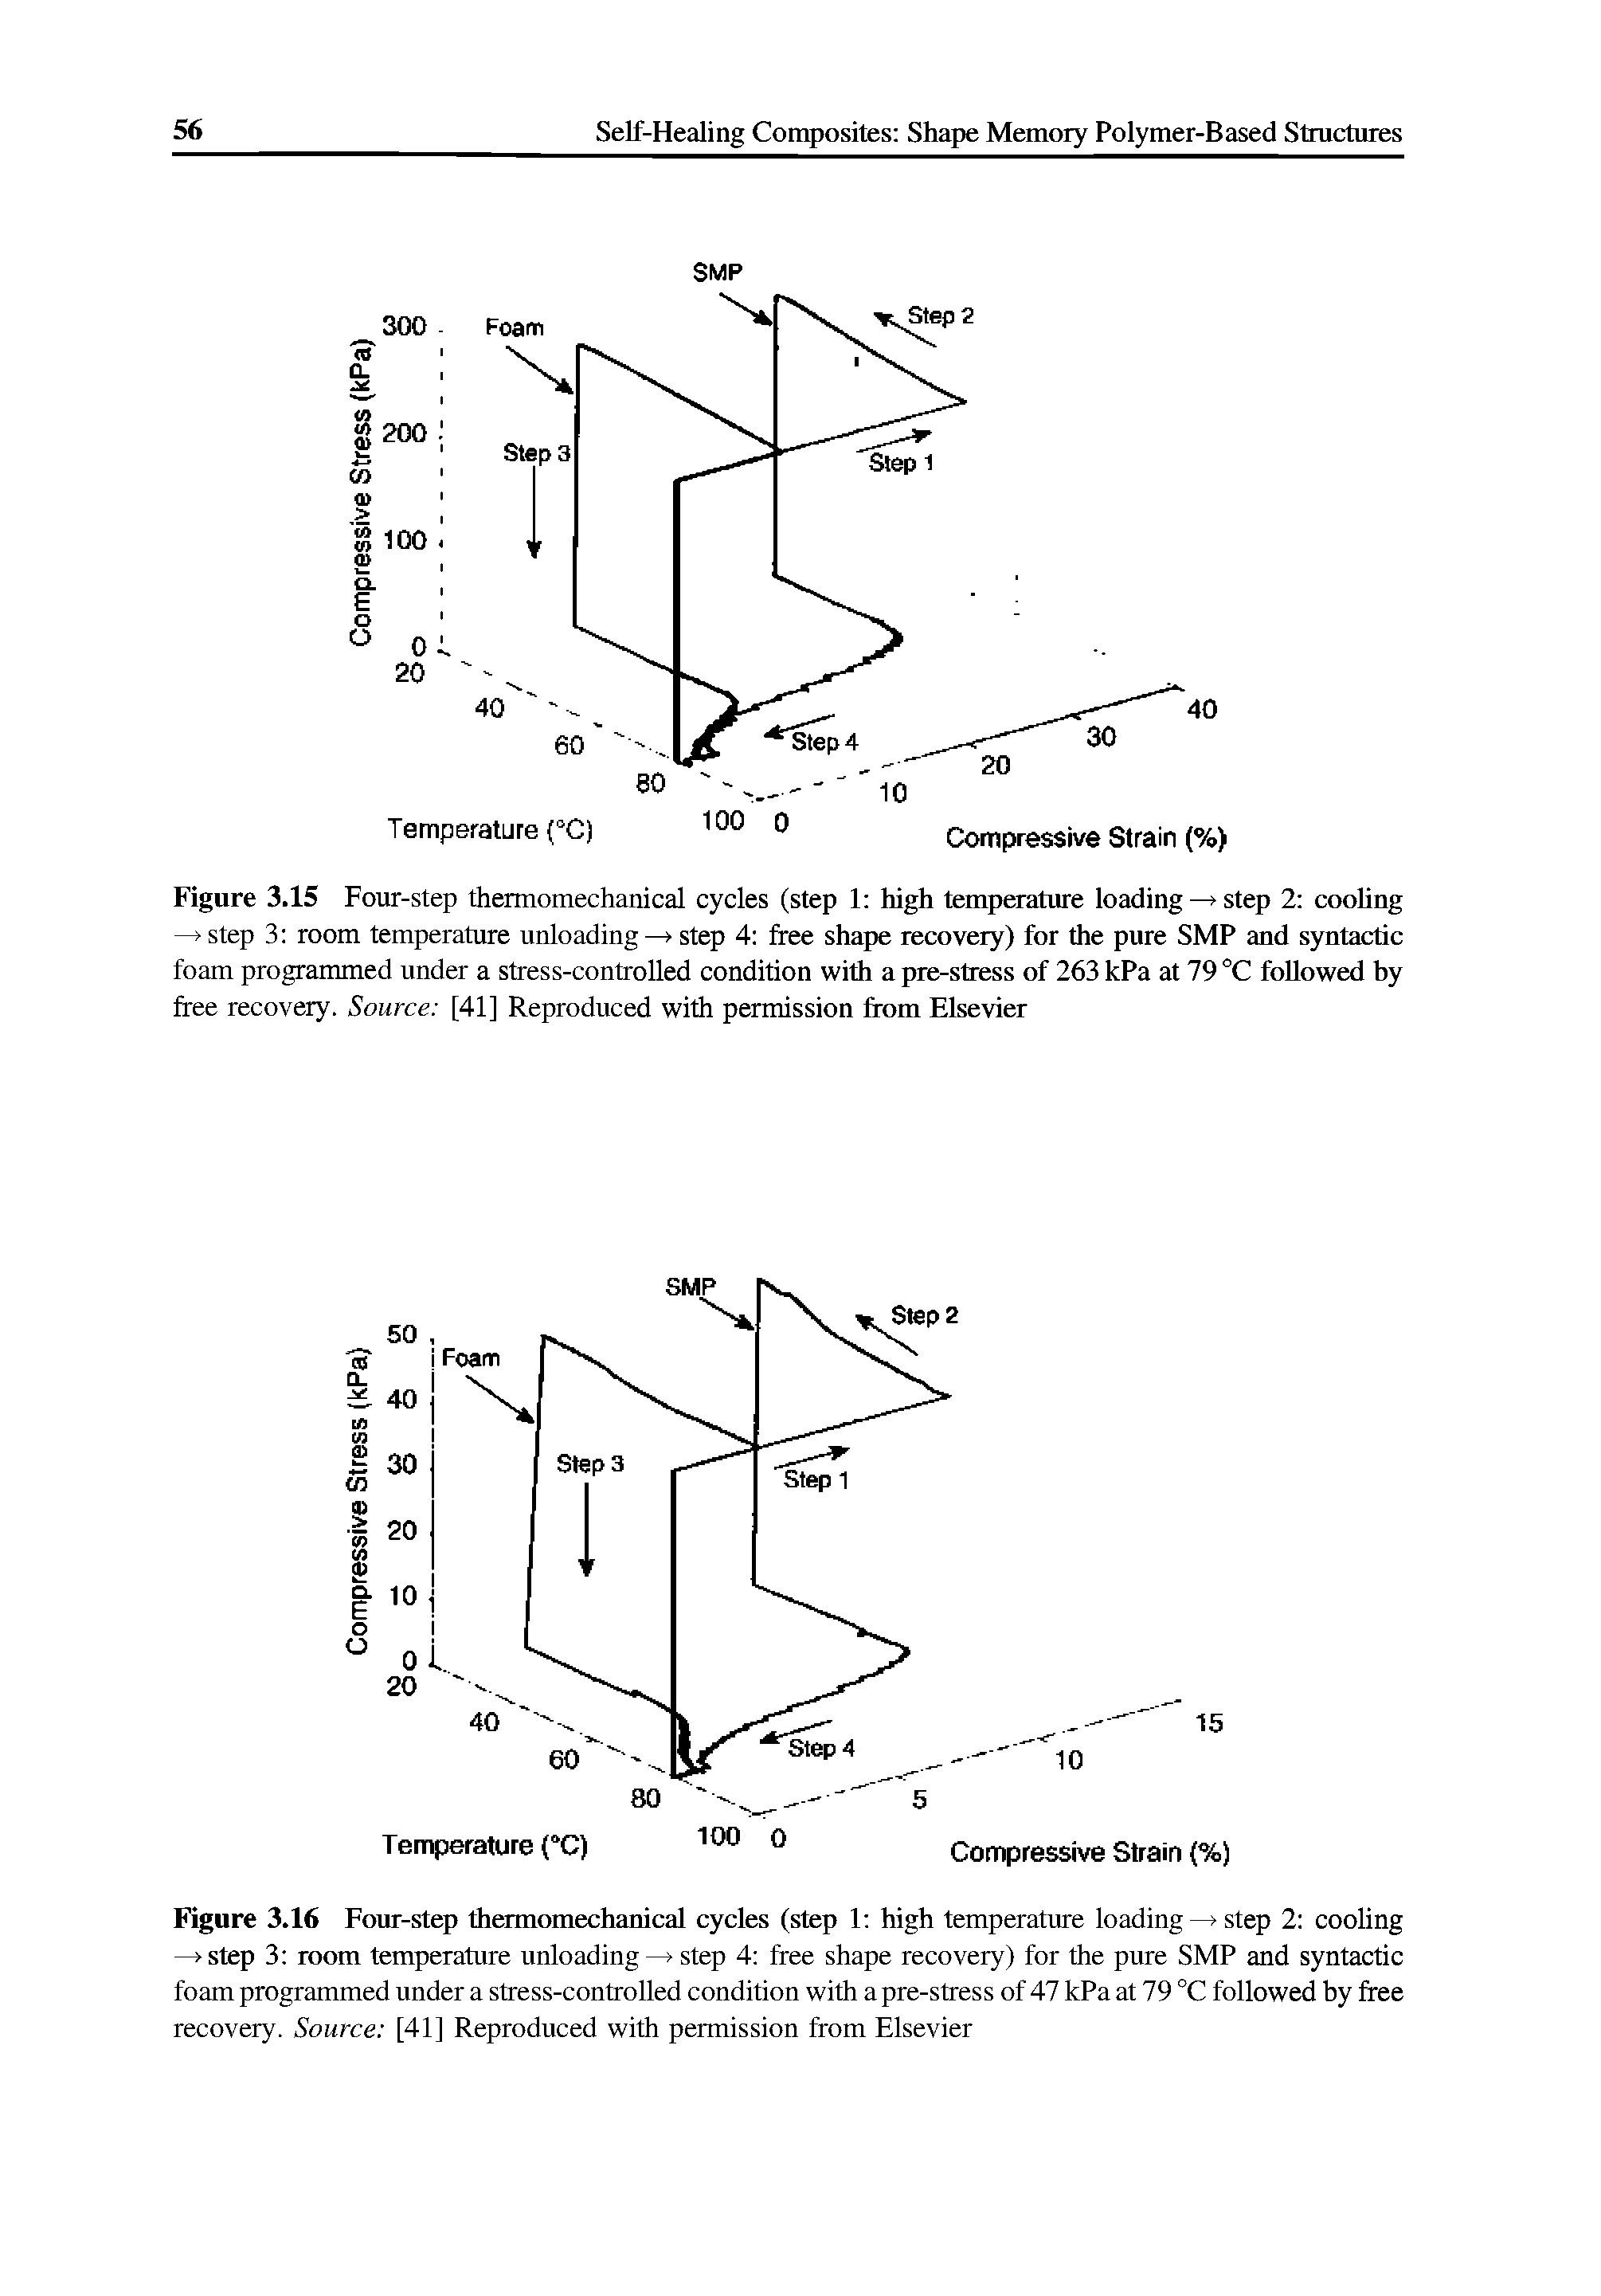 Figure 3.15 Four-step thermomechanical cycles (step 1 high temperature loading—> step 2 cooling step 3 room temperature unloading step 4 free shape recovery) for the pure SMP and syntactic foam programmed under a stress-controlled condition with a pre-stress of 263 kPa at 79 °C followed by free recovery. Source [41] Reproduced with permission from Elsevier...